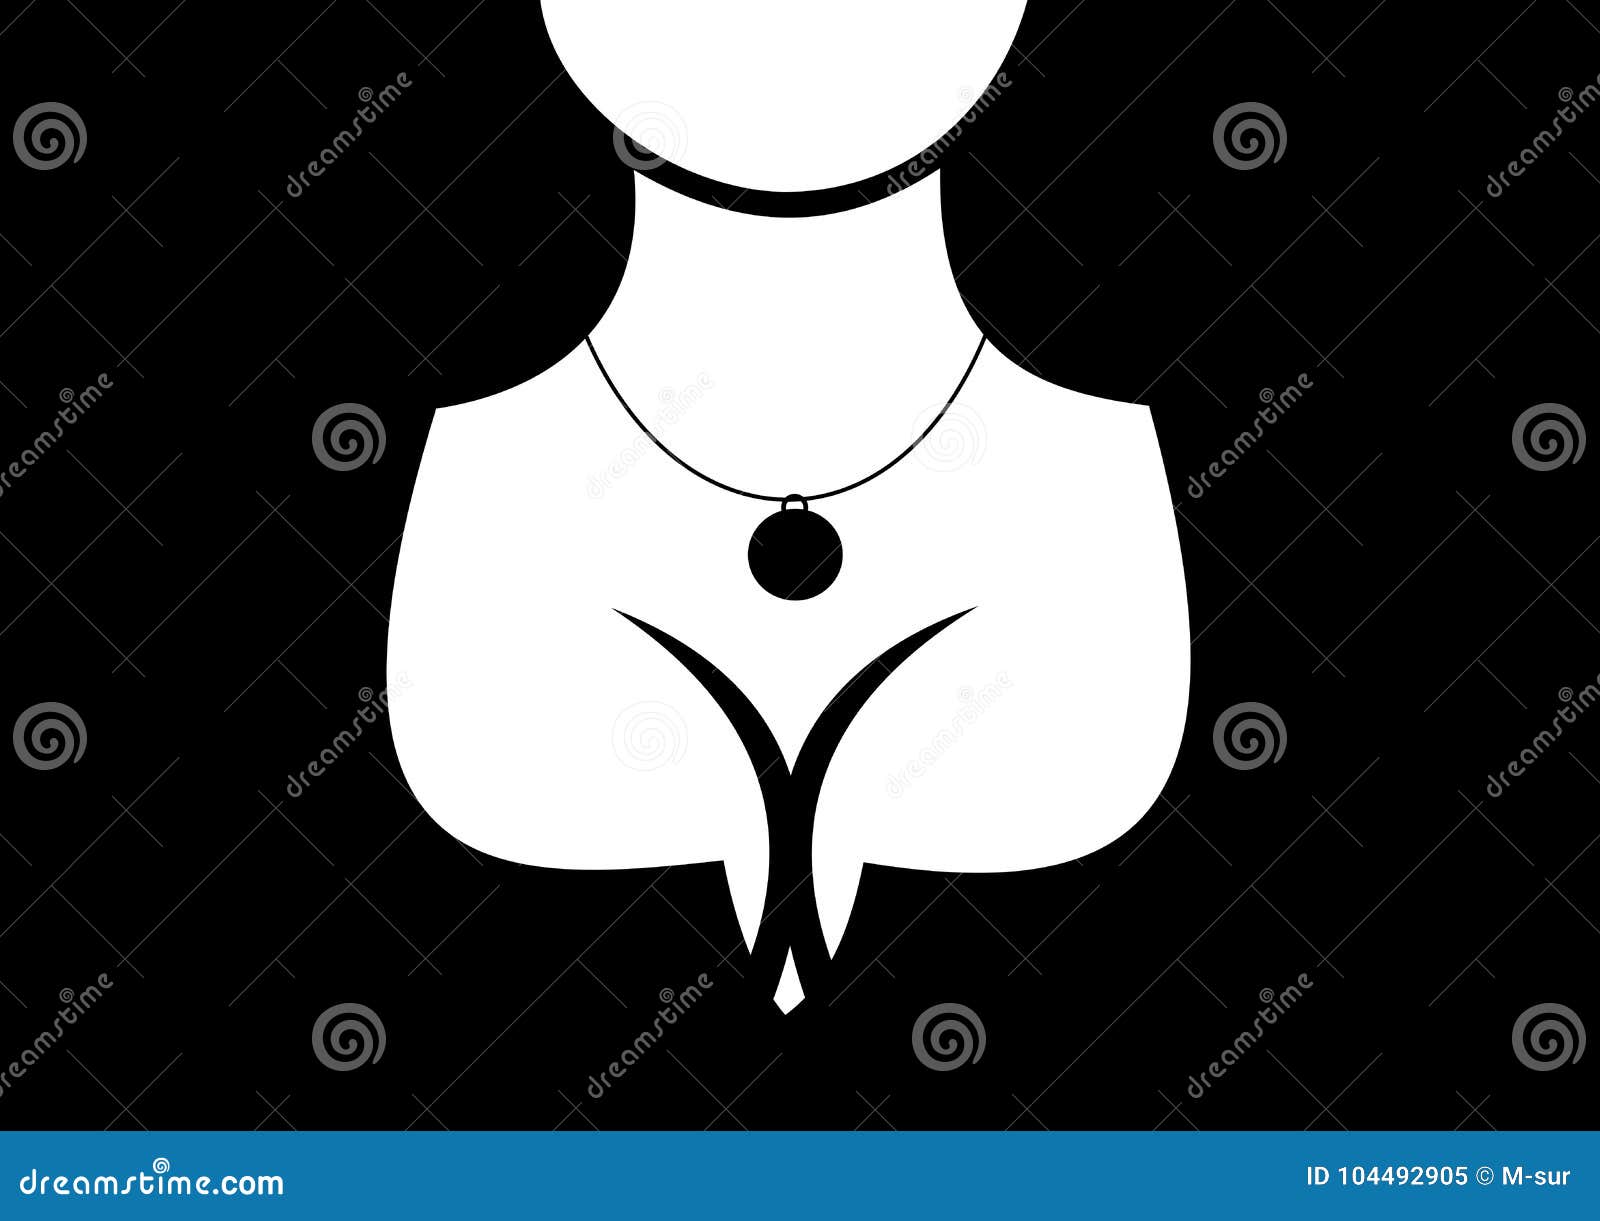 Cleavage clipart